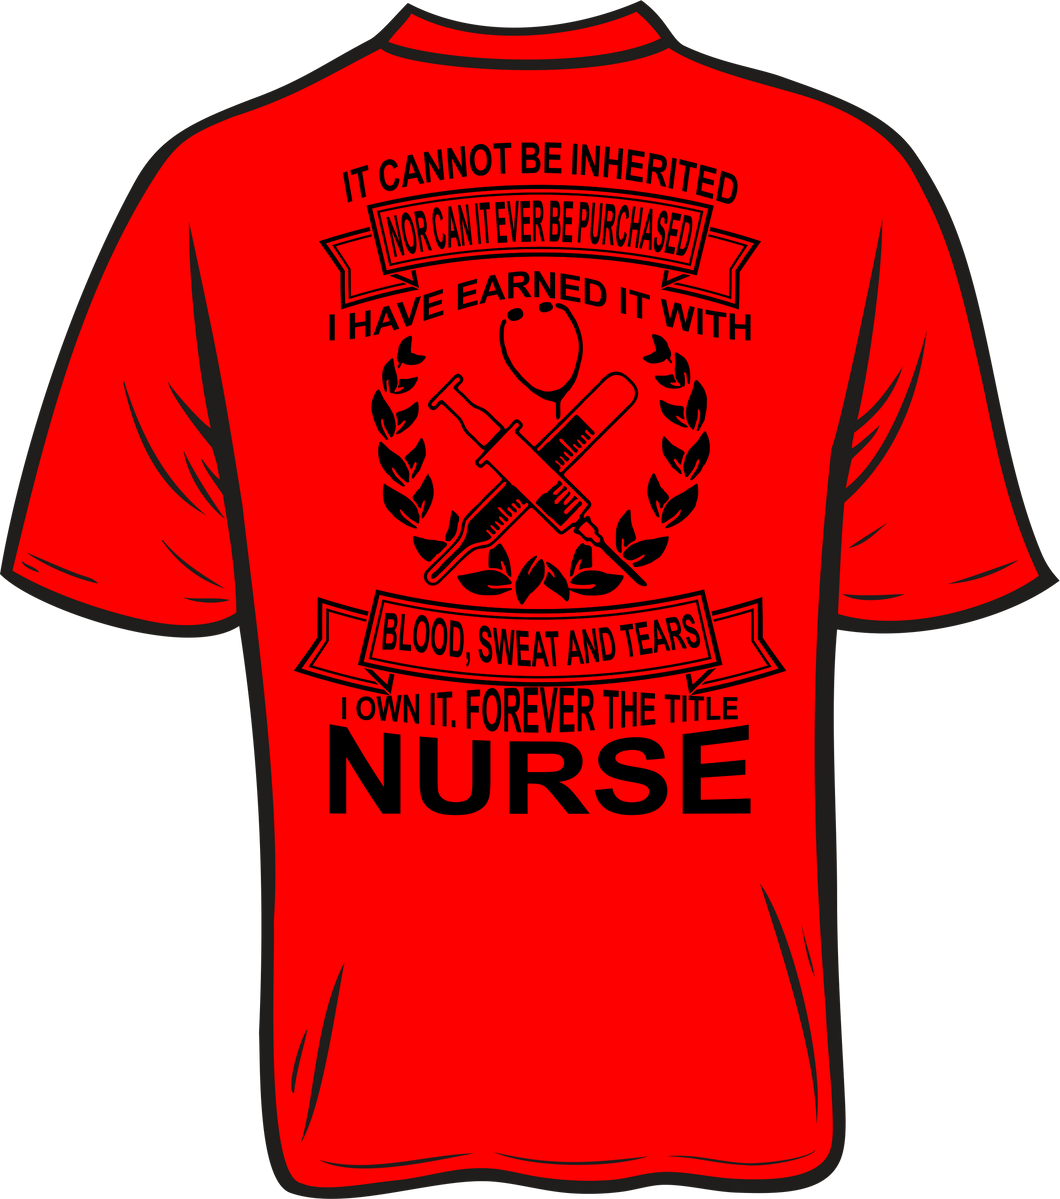 It cannot be inherited nor can it be purchased Nurse tshirt